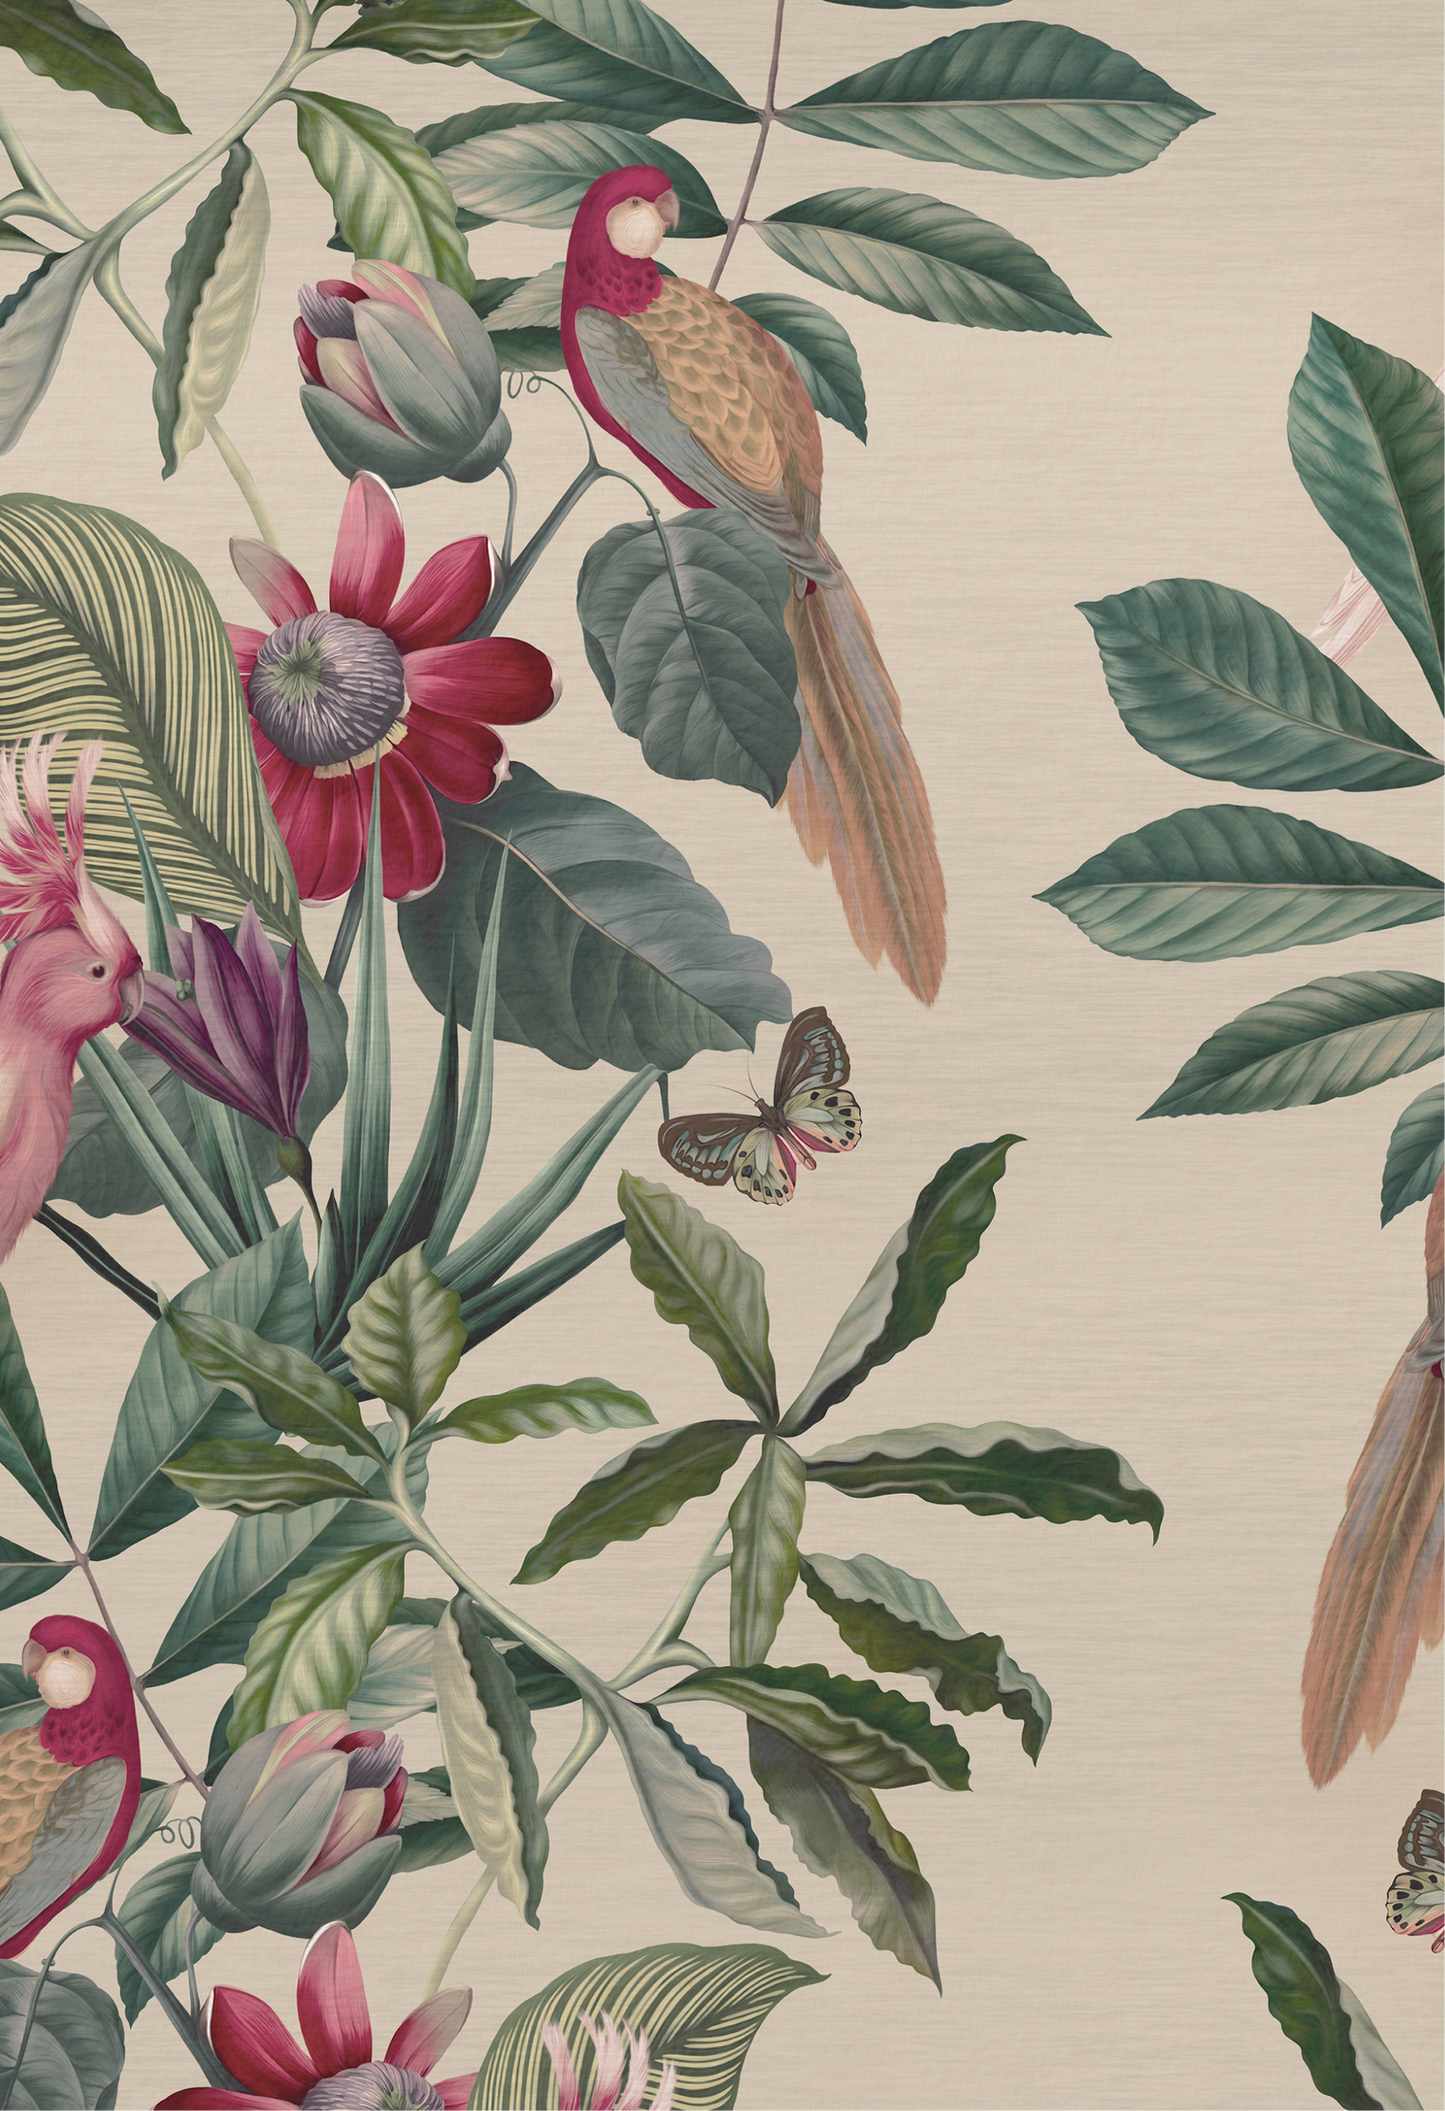 Passion flower surrounded by tropical birds, flowers in a canopy on light background by Deus ex Gardenia of Passiflora wallpaper in Antique.